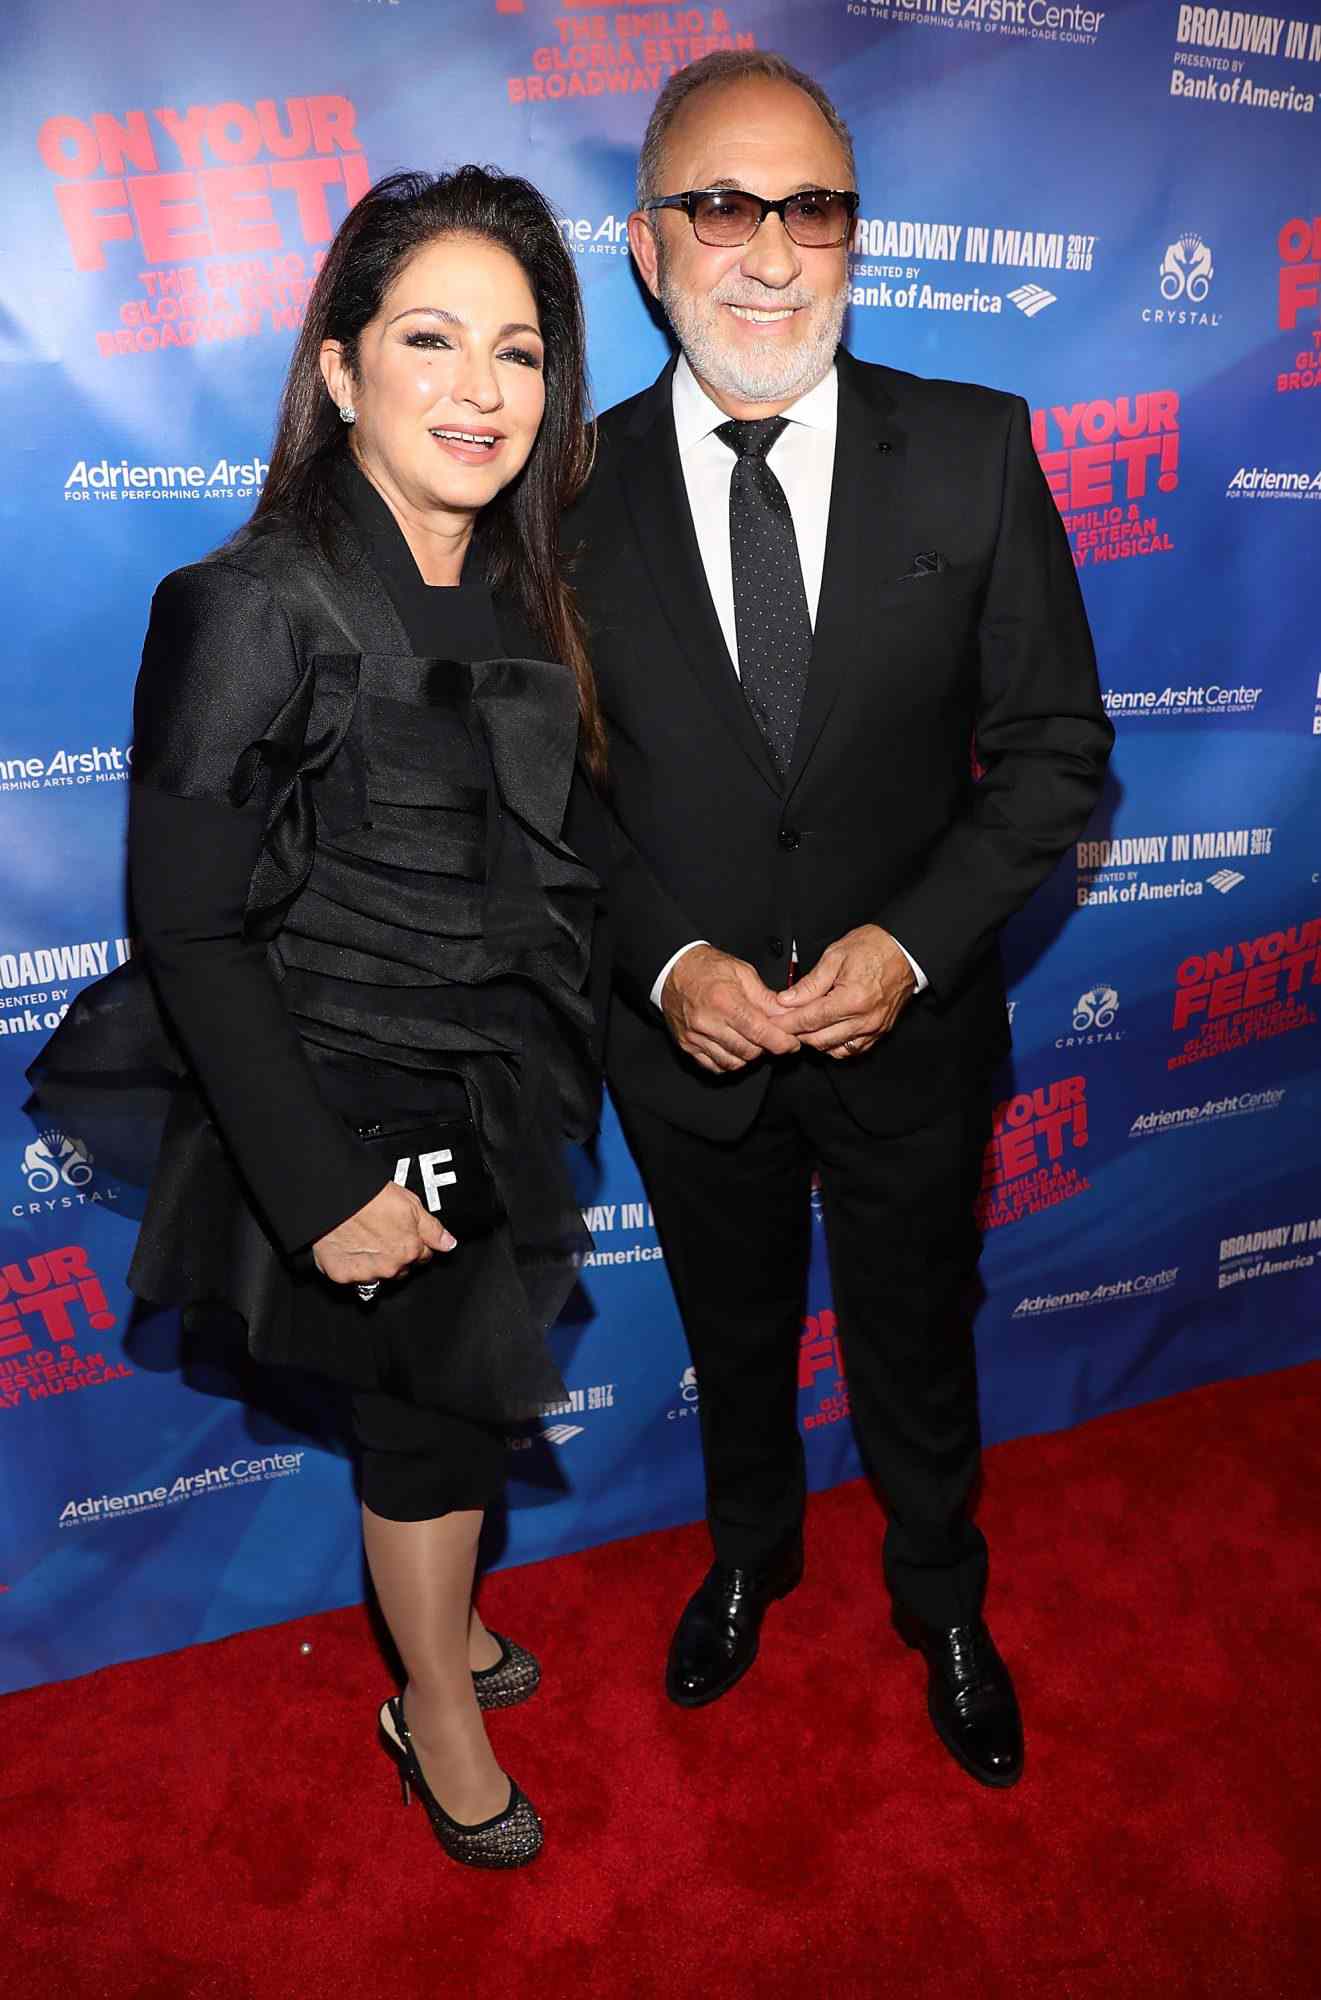 "On Your Feet!" National Tour Opening Night